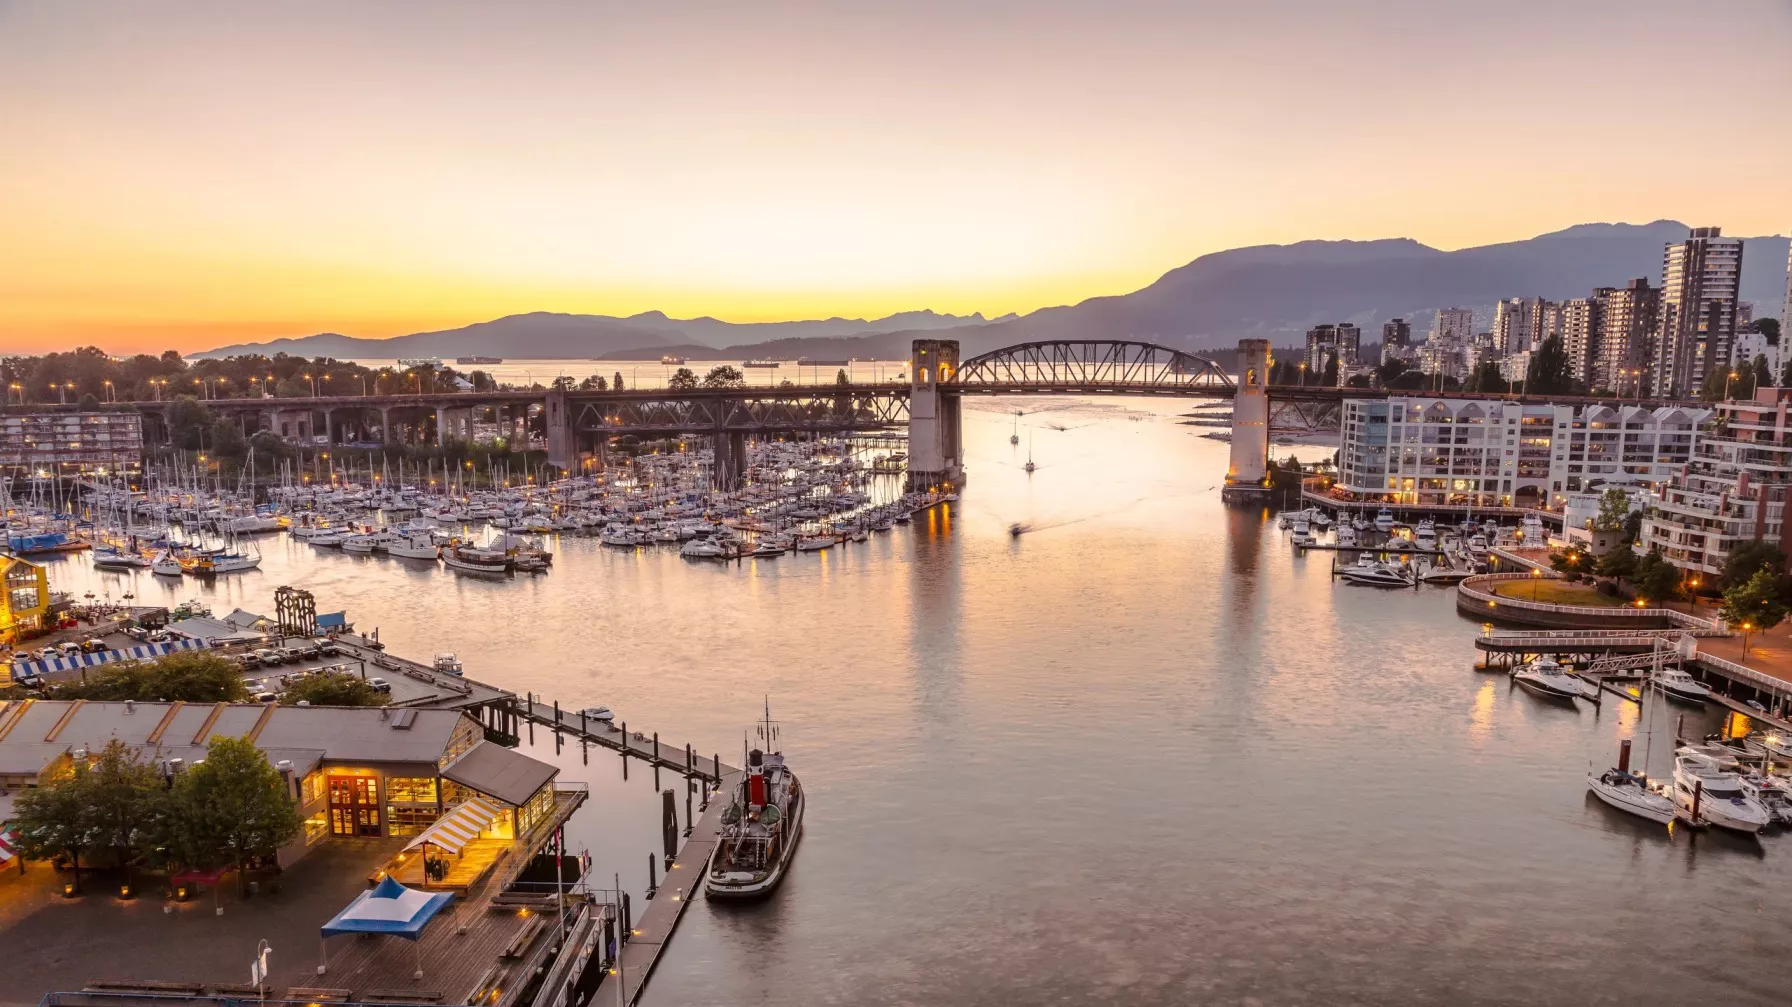 sunset over granville island near freedom boat club north vancouver